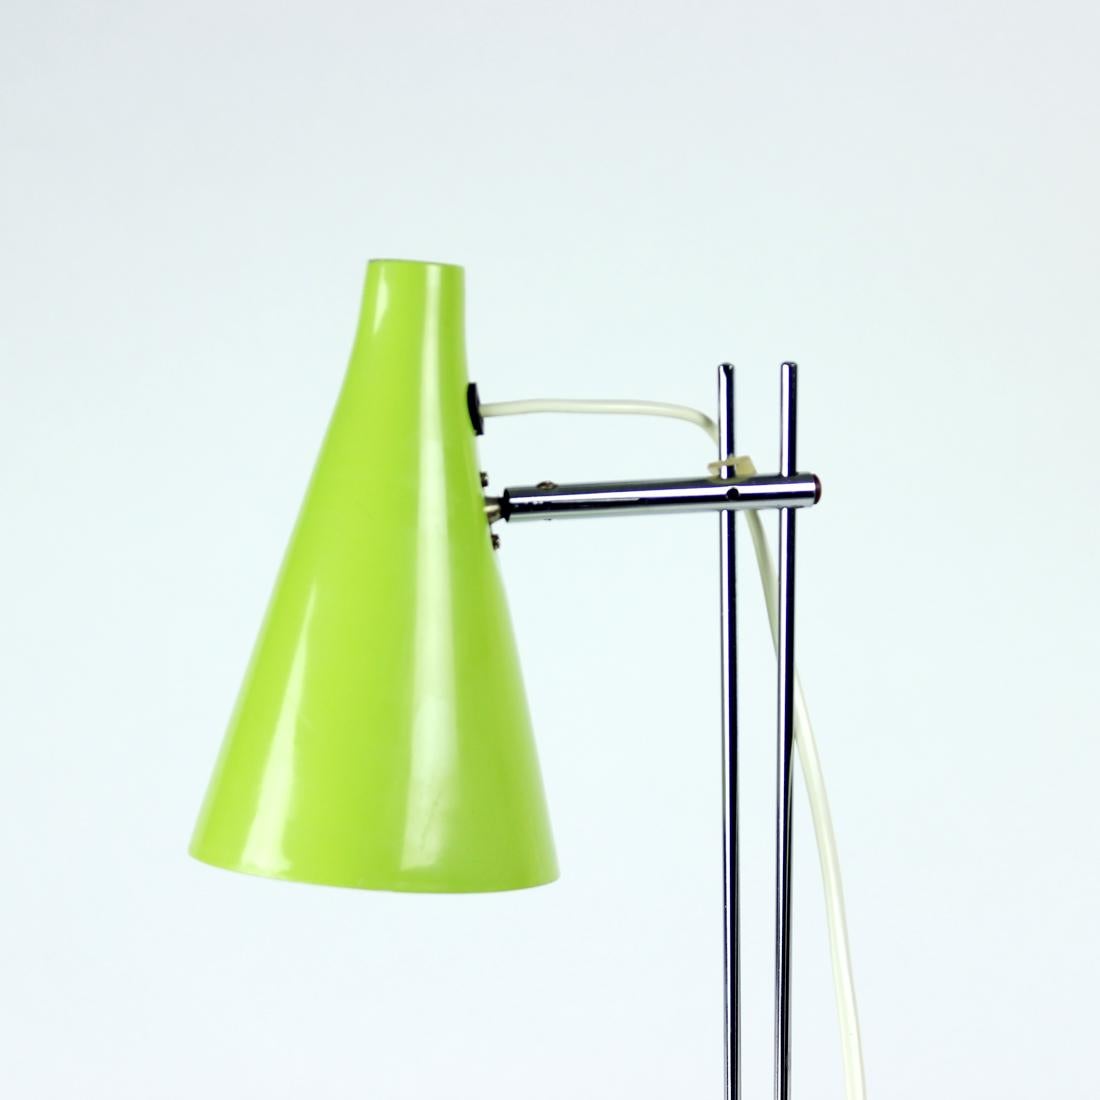 Mid-Century Modern Green Metal Table Lamp by Lidokov, Czechoslovakia 1960s For Sale